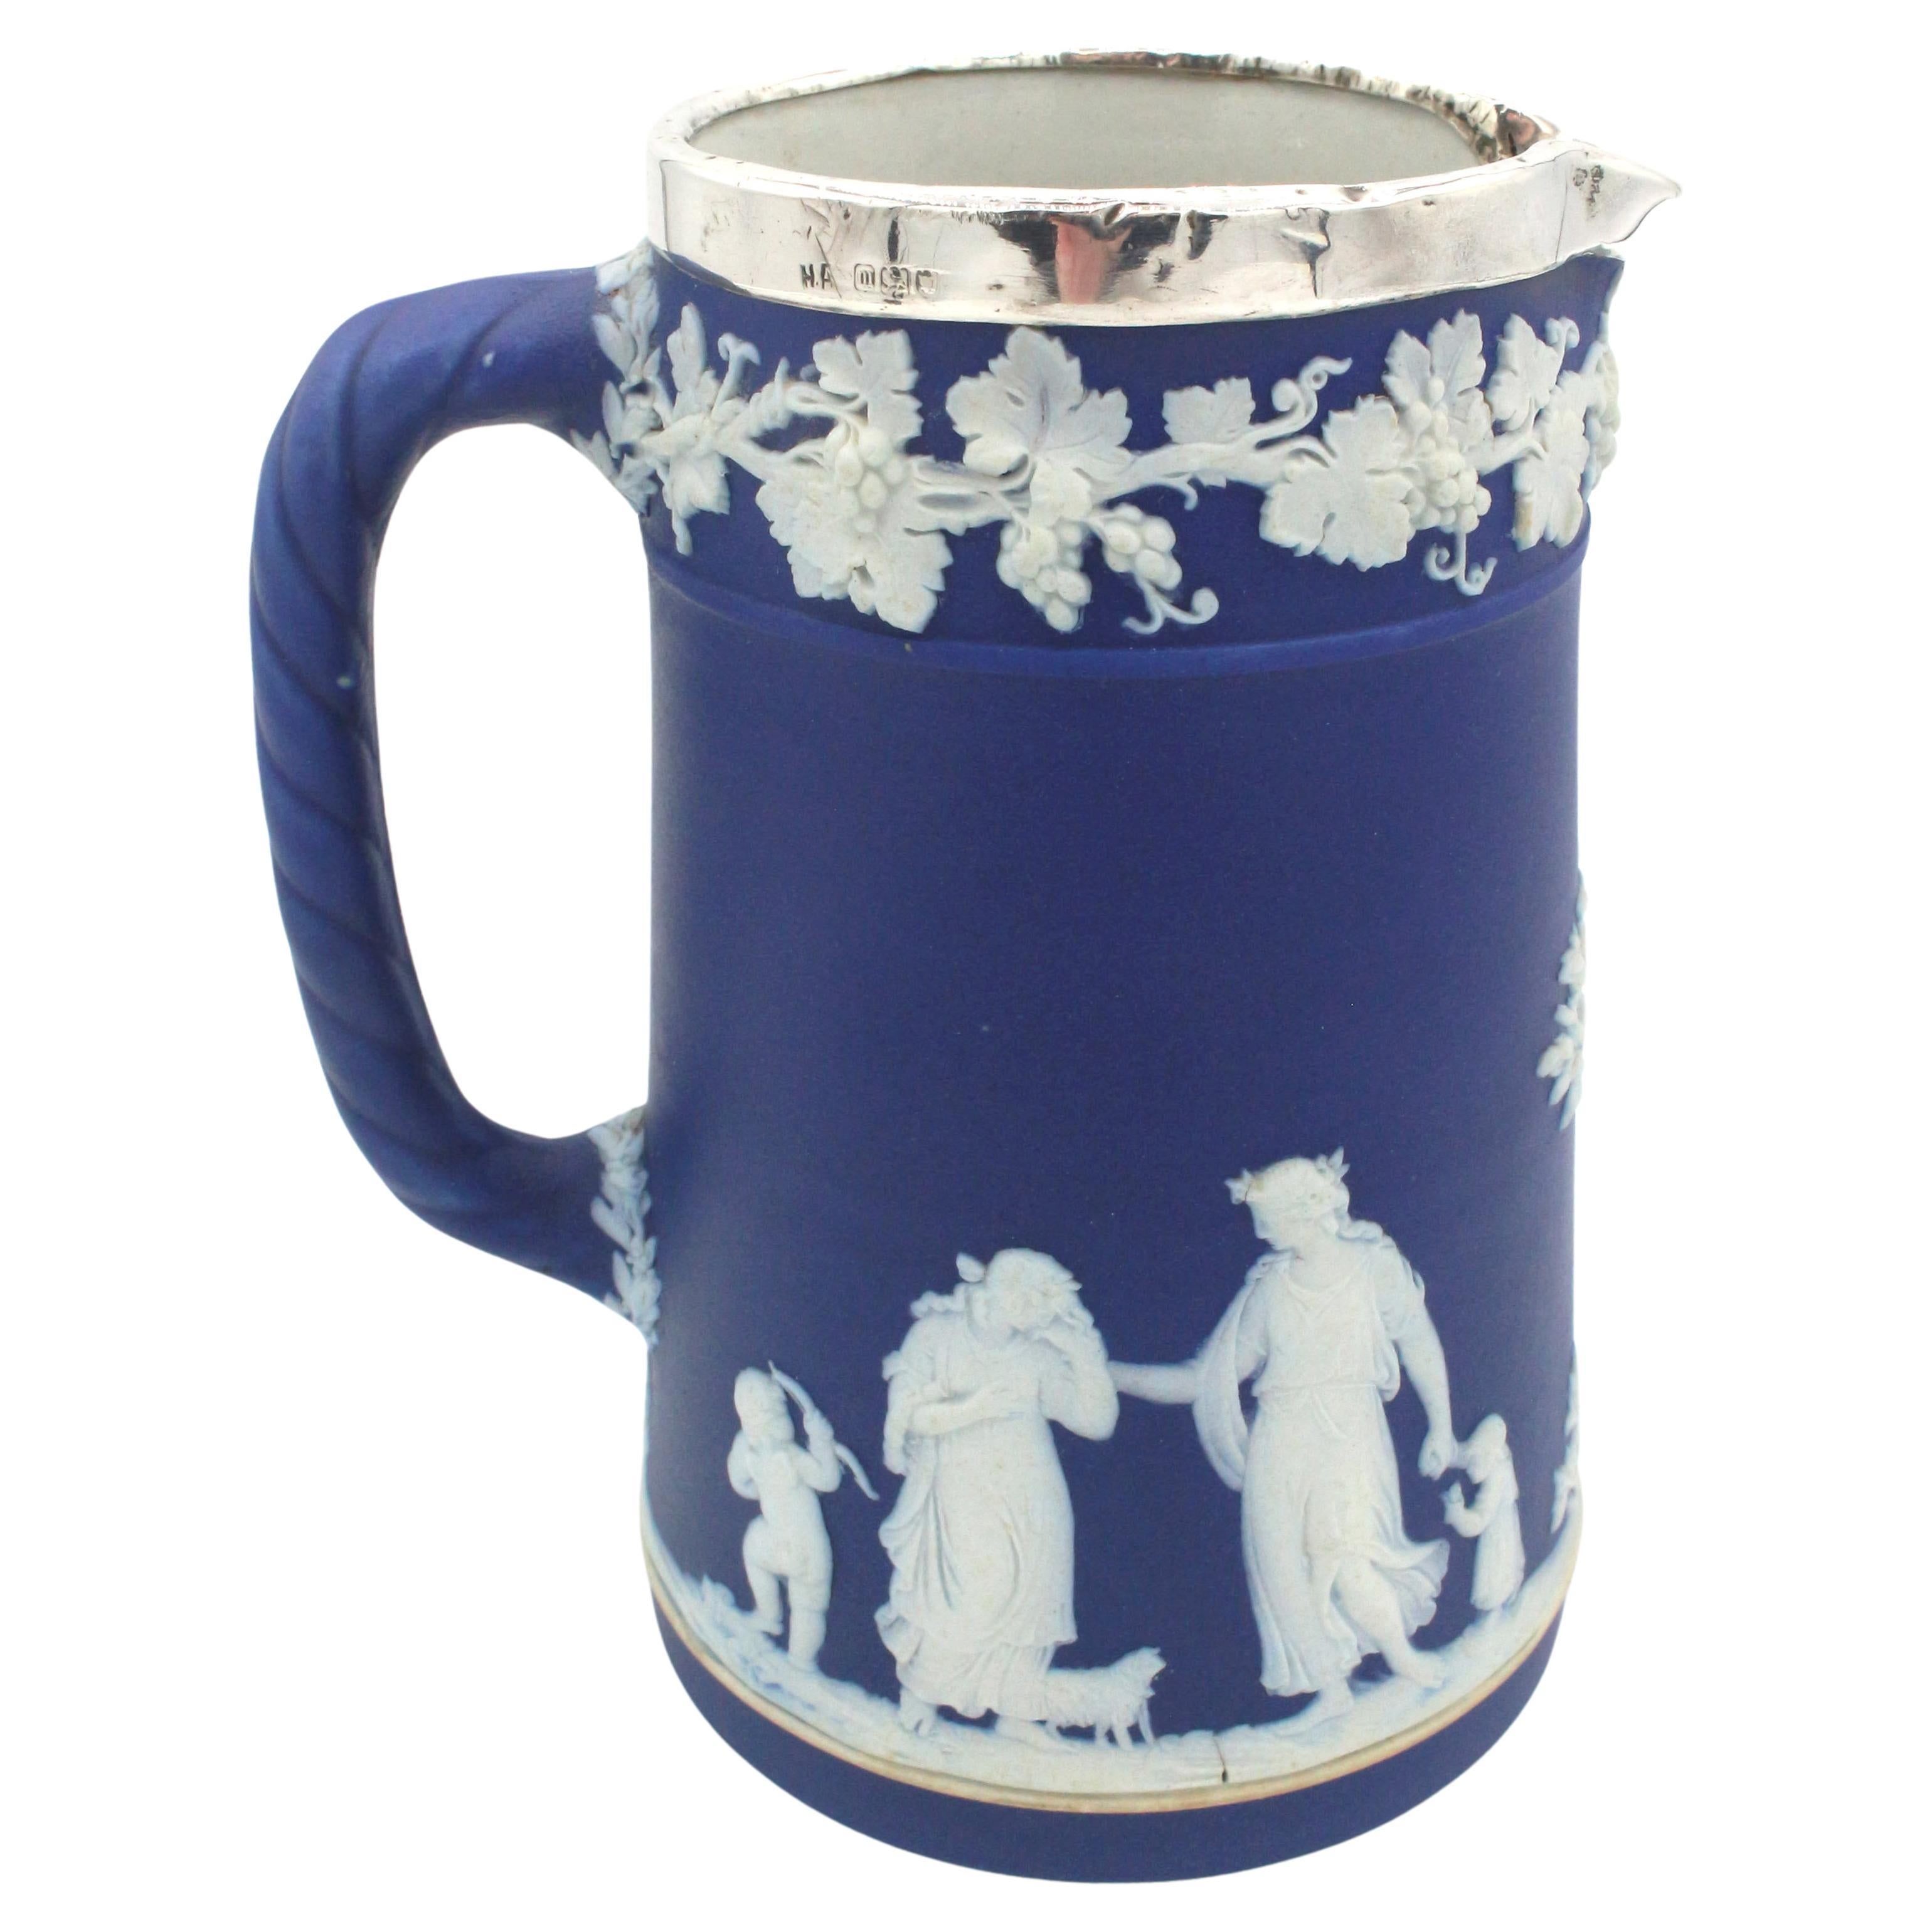  Early 20th-Century Jasperware Wedgwood Pitcher with Sterling Rim For Sale